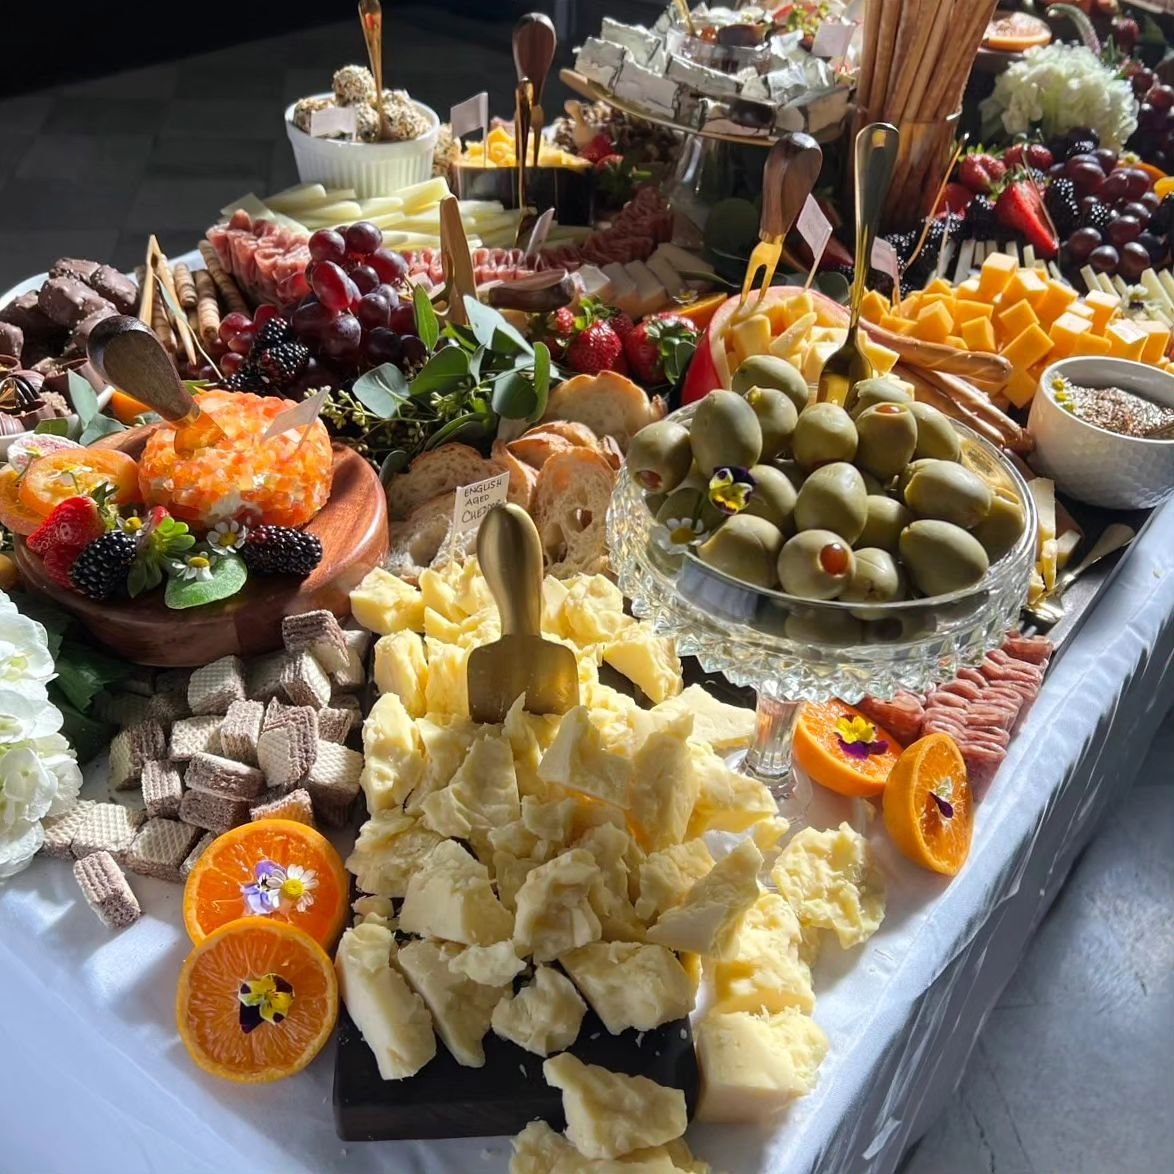 Grazing still life.

#gatheringfeast #grazing #grazigntable #cheeswboard #cheeseboard #charcuterieboard #charcuterie #catered #catering #womanownedbusiness #smallbusiness #foodstyling #foodstagram #cheese #cheddar #olives #delice